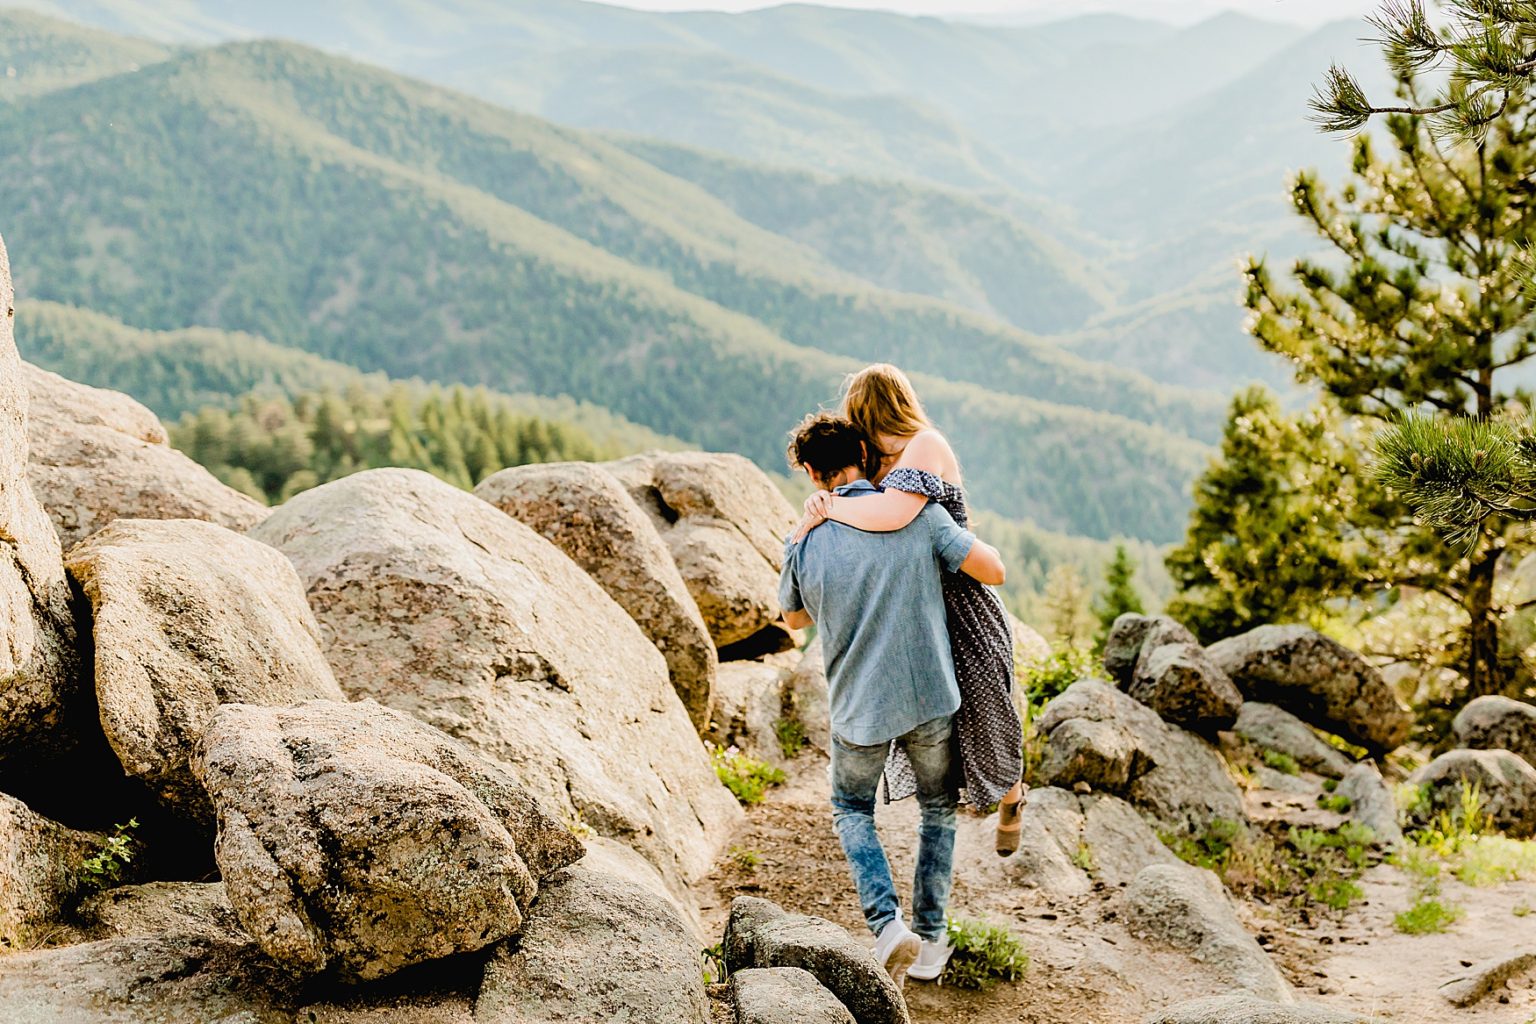 guy lifts girl over rocks with beautiful mountain backdrop